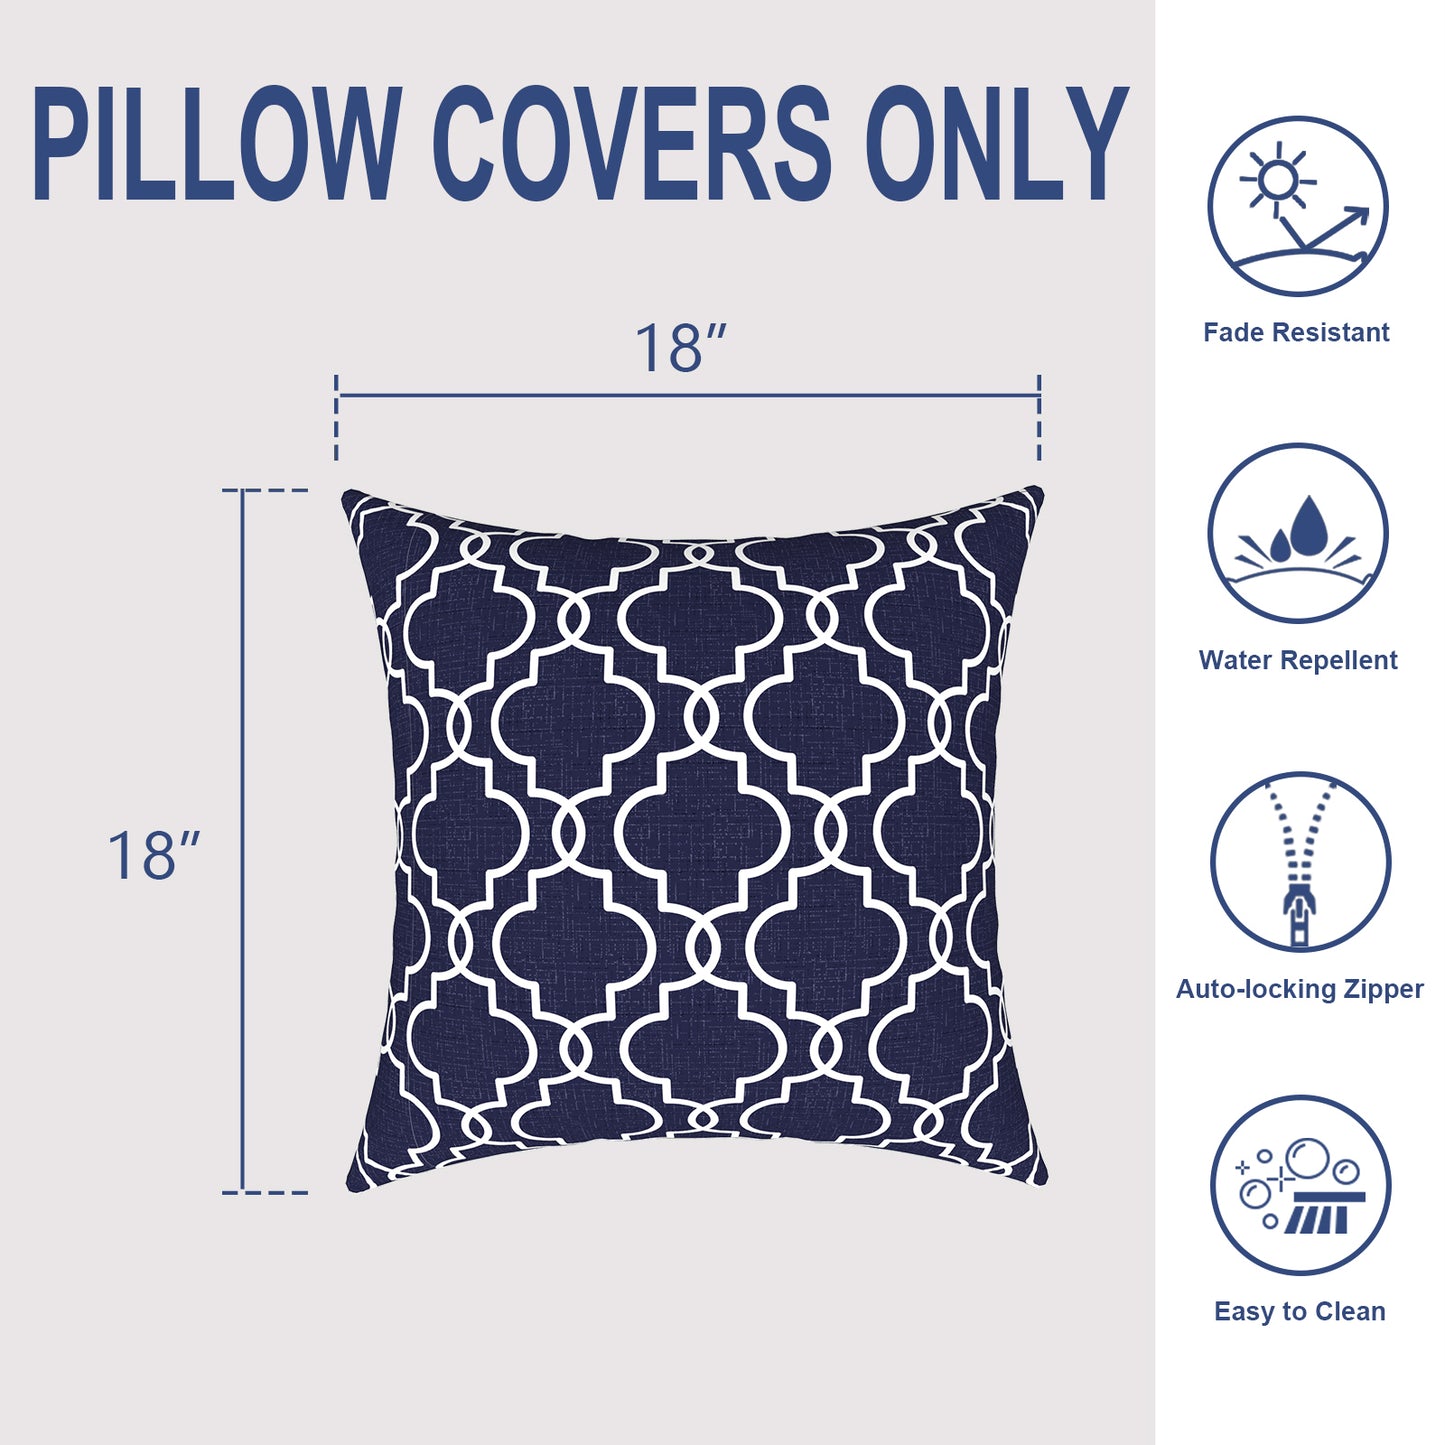 Melody Elephant Outdoor Throw Pillow Covers Pack of 2, Decorative Water Repellent Square Pillow Cases 18x18 Inch, Patio Pillowcases for Home Patio Furniture Use, Carmody Navy